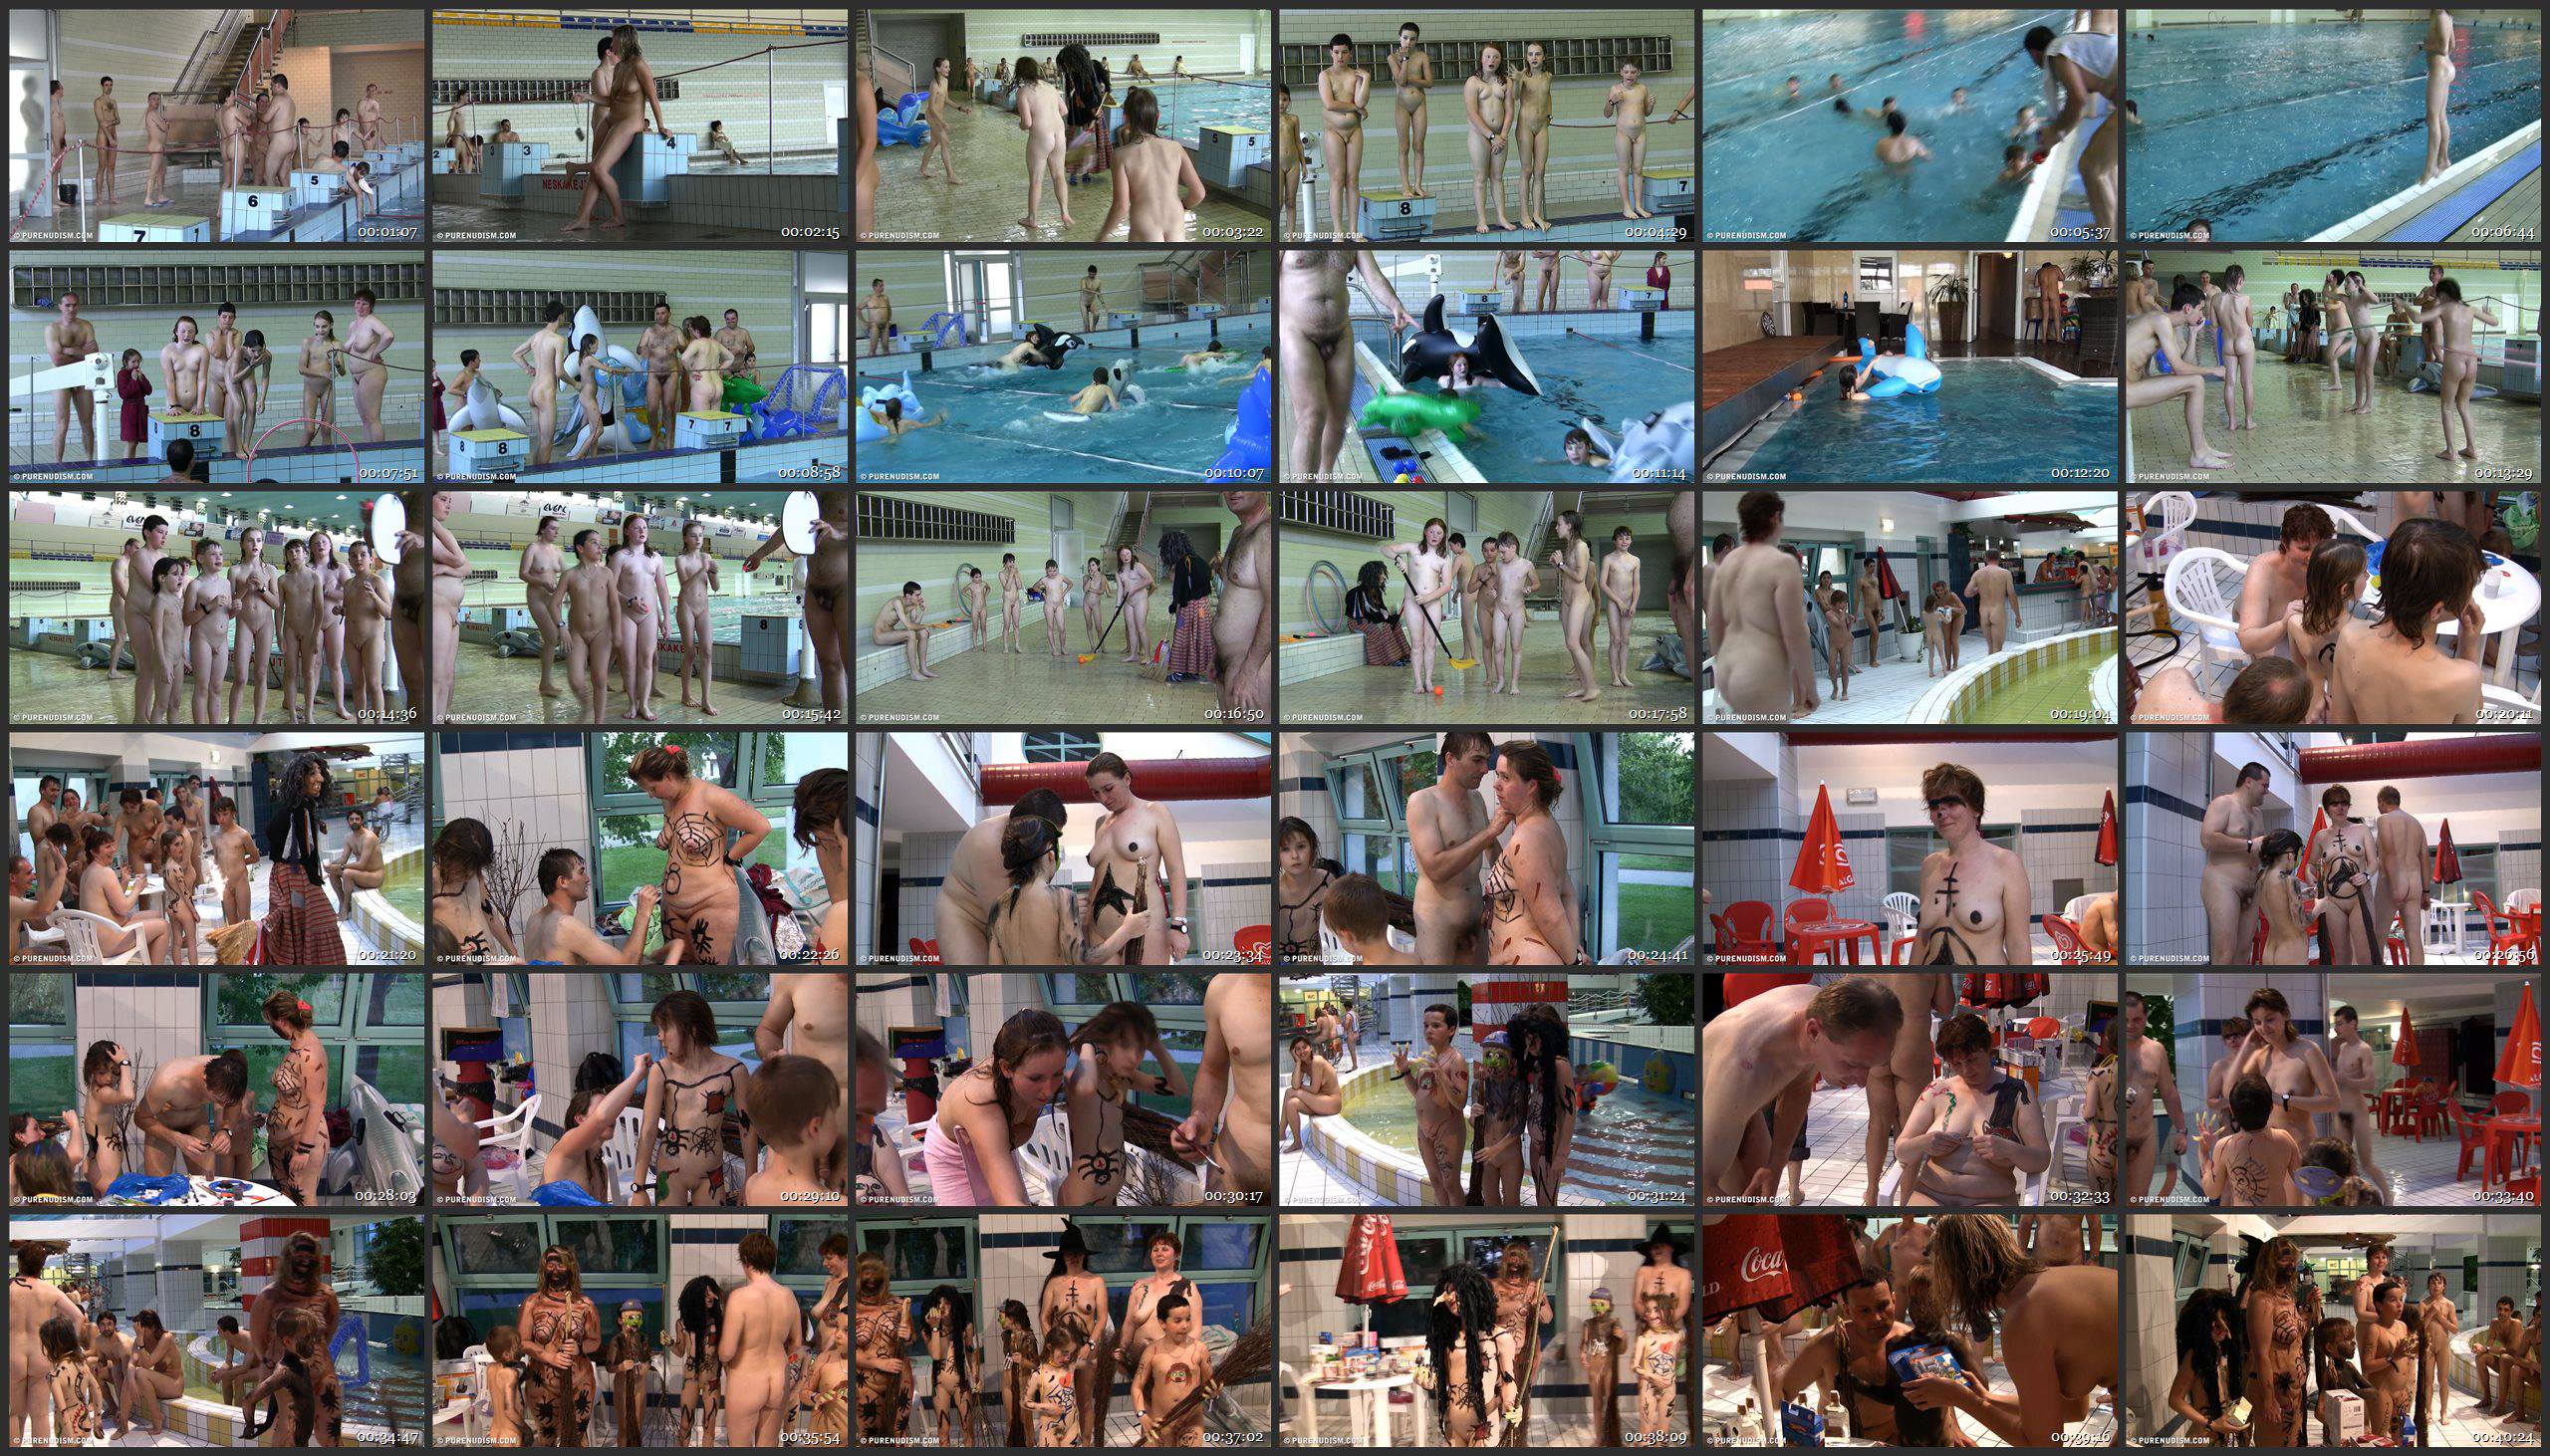 Naturist Pool and Games - Thumbnails